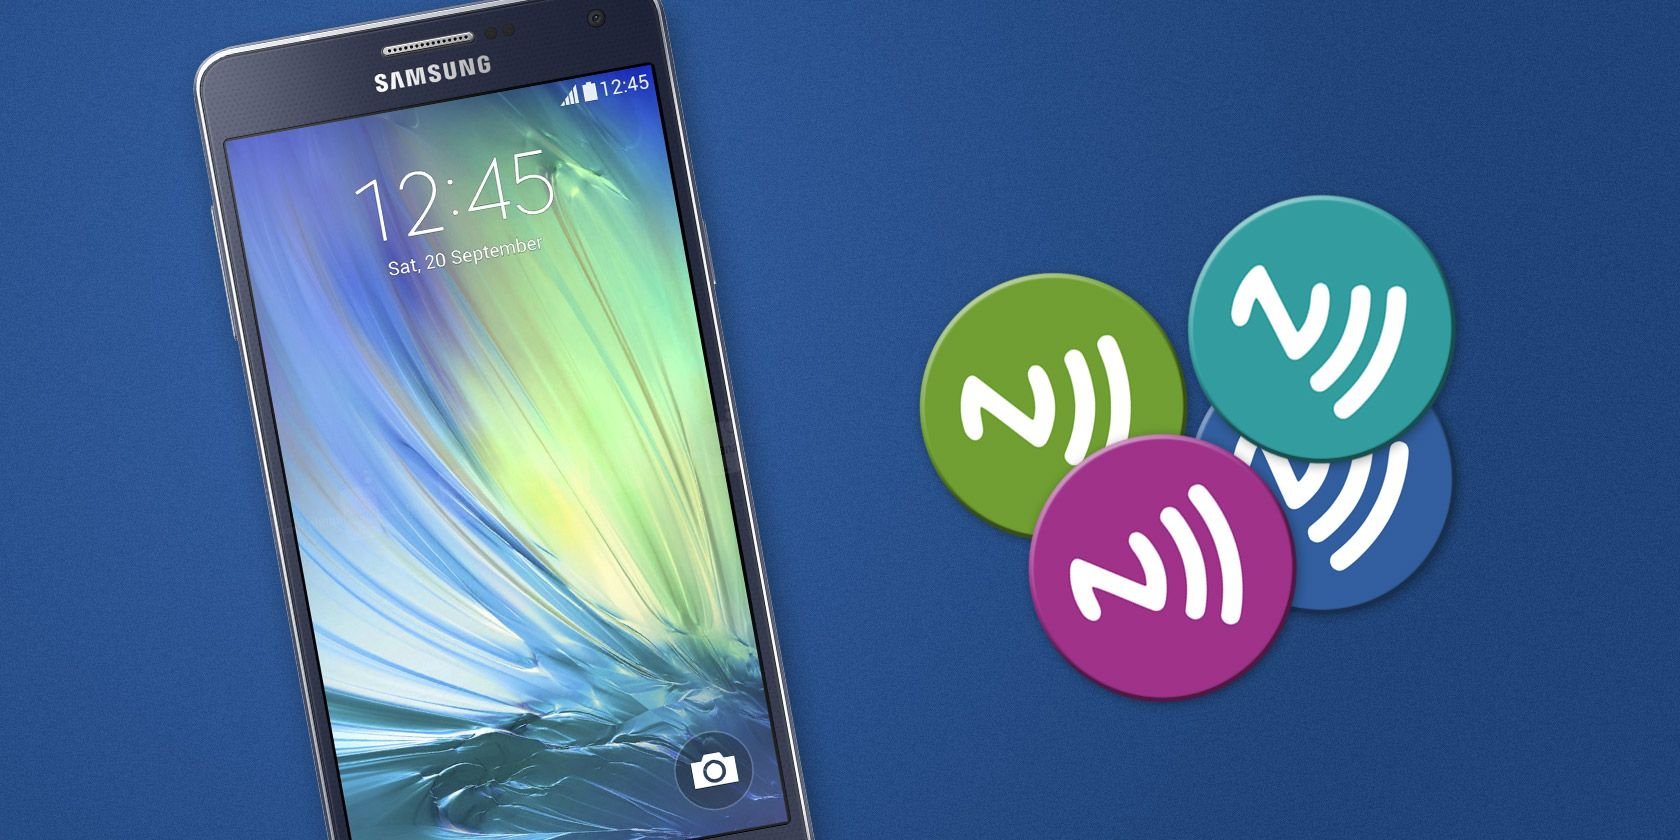 7 Cool Ways to Use NFC That'll Impress Your Friends